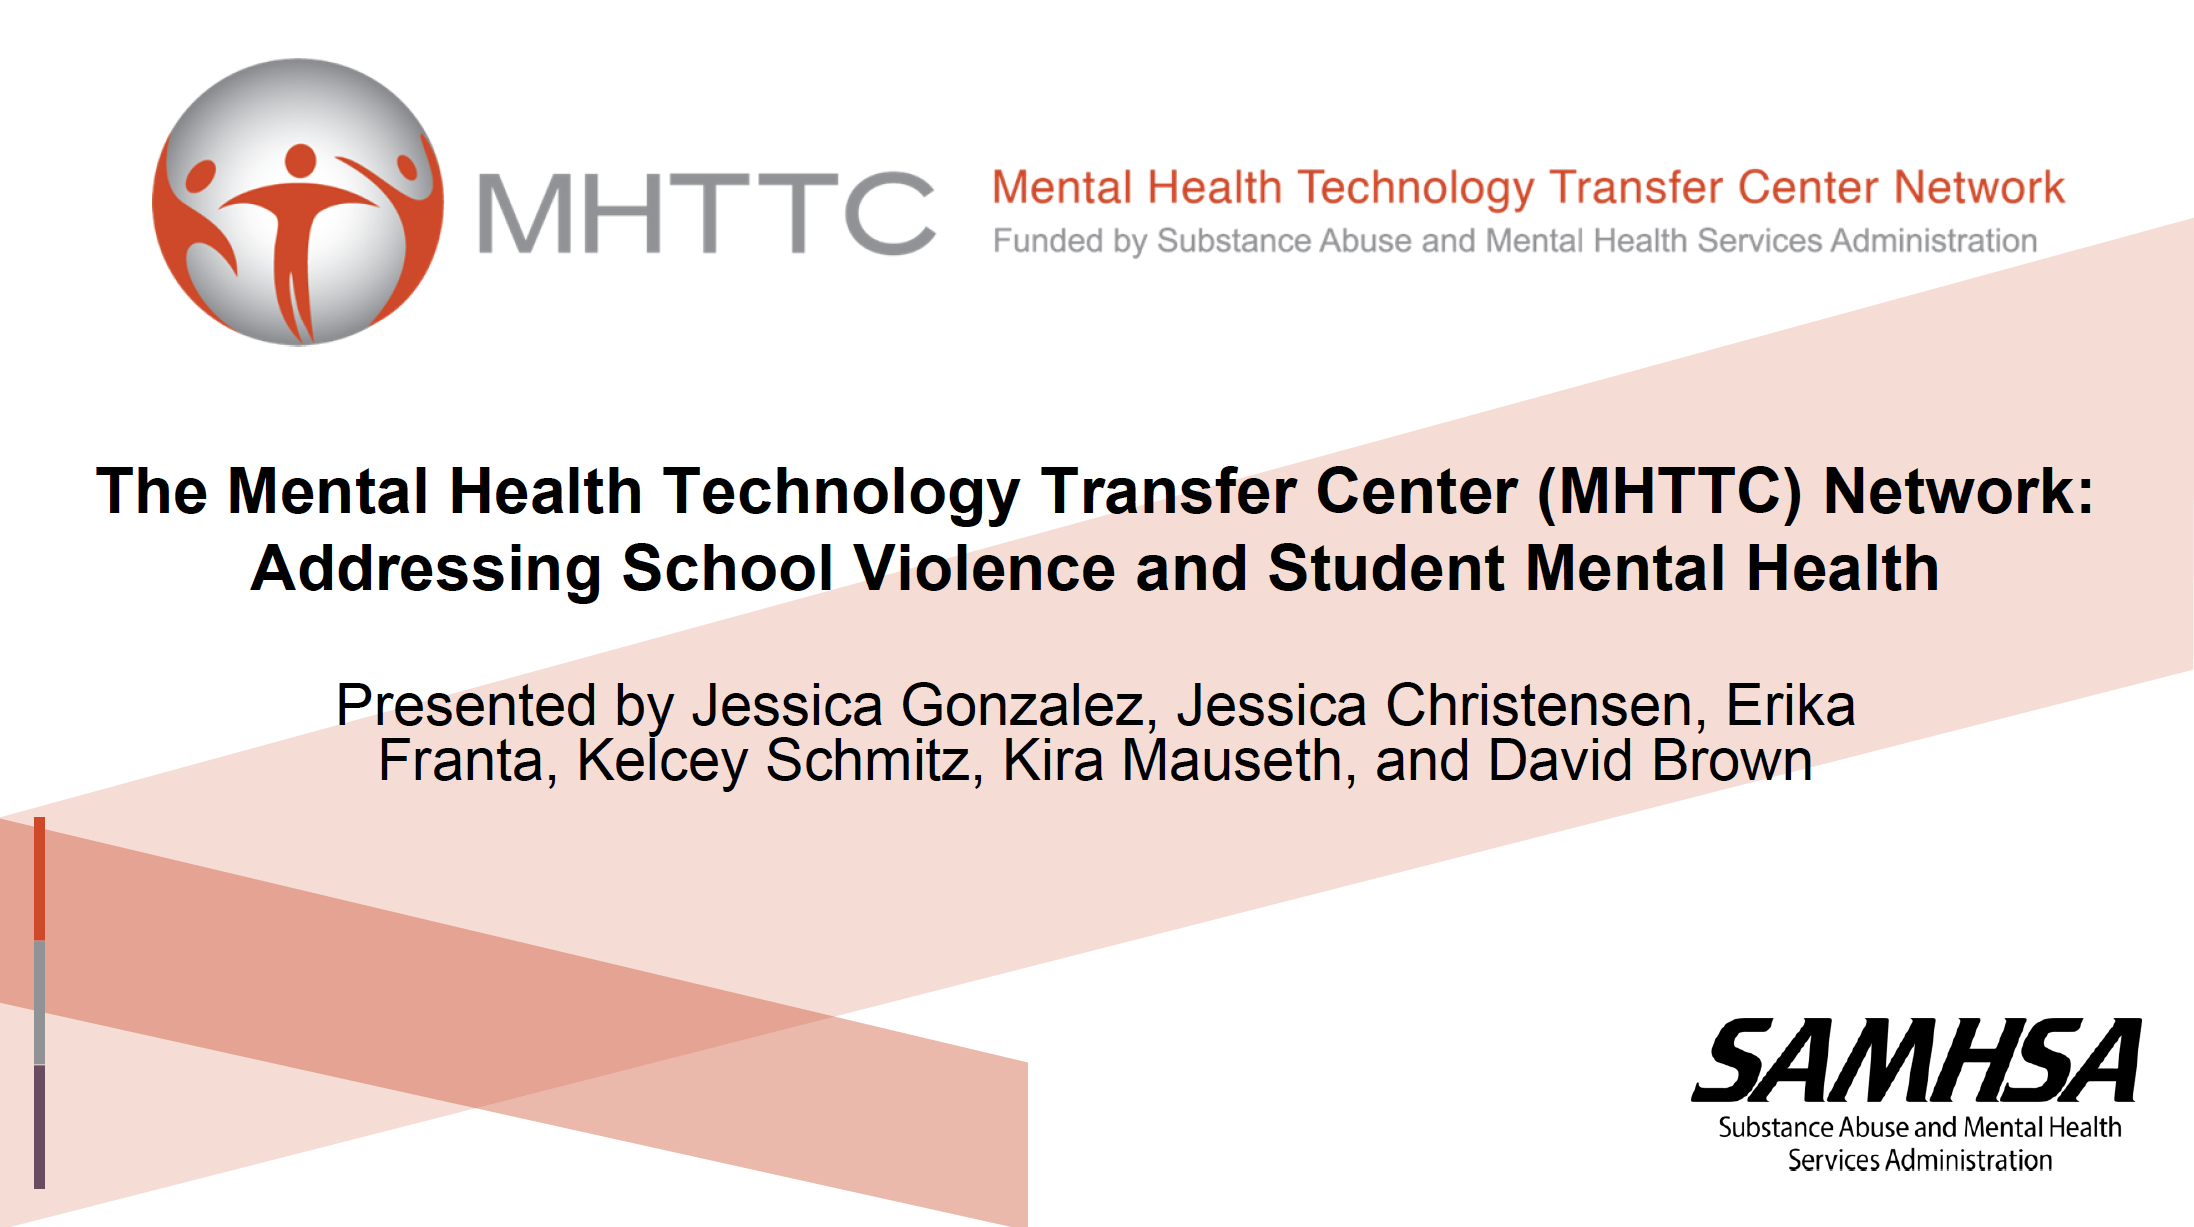 The MHTTC Network: Addressing School Violence and Student Mental Health